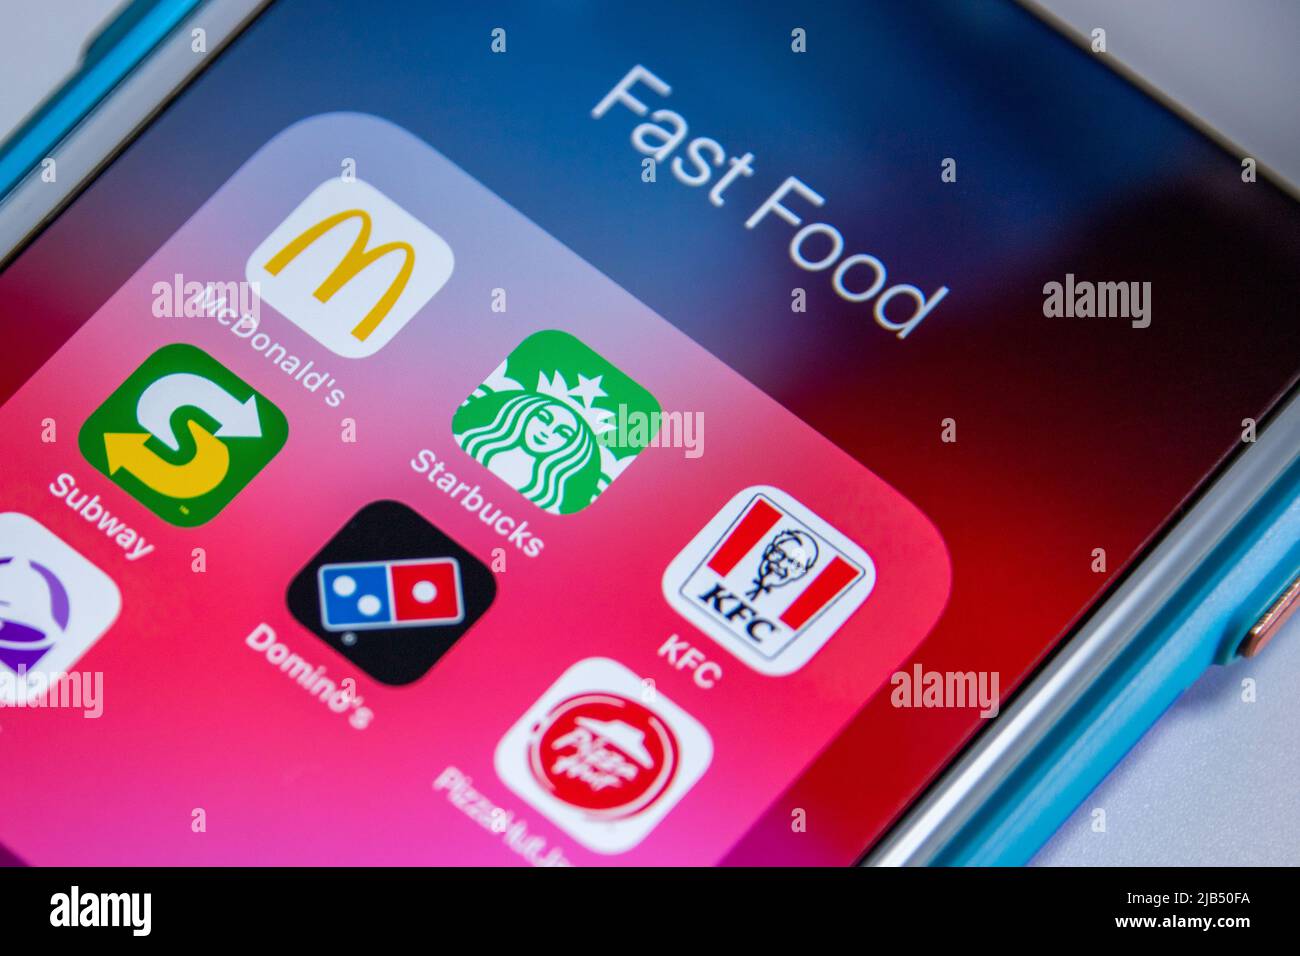 Popular US chain restaurant, cafe and takeaway (delivery) brands (Mcdonald’s, Starbucks, KFC, Subway, Domino’s, PizzaHut and Taco Bell) on iPhone. Stock Photo